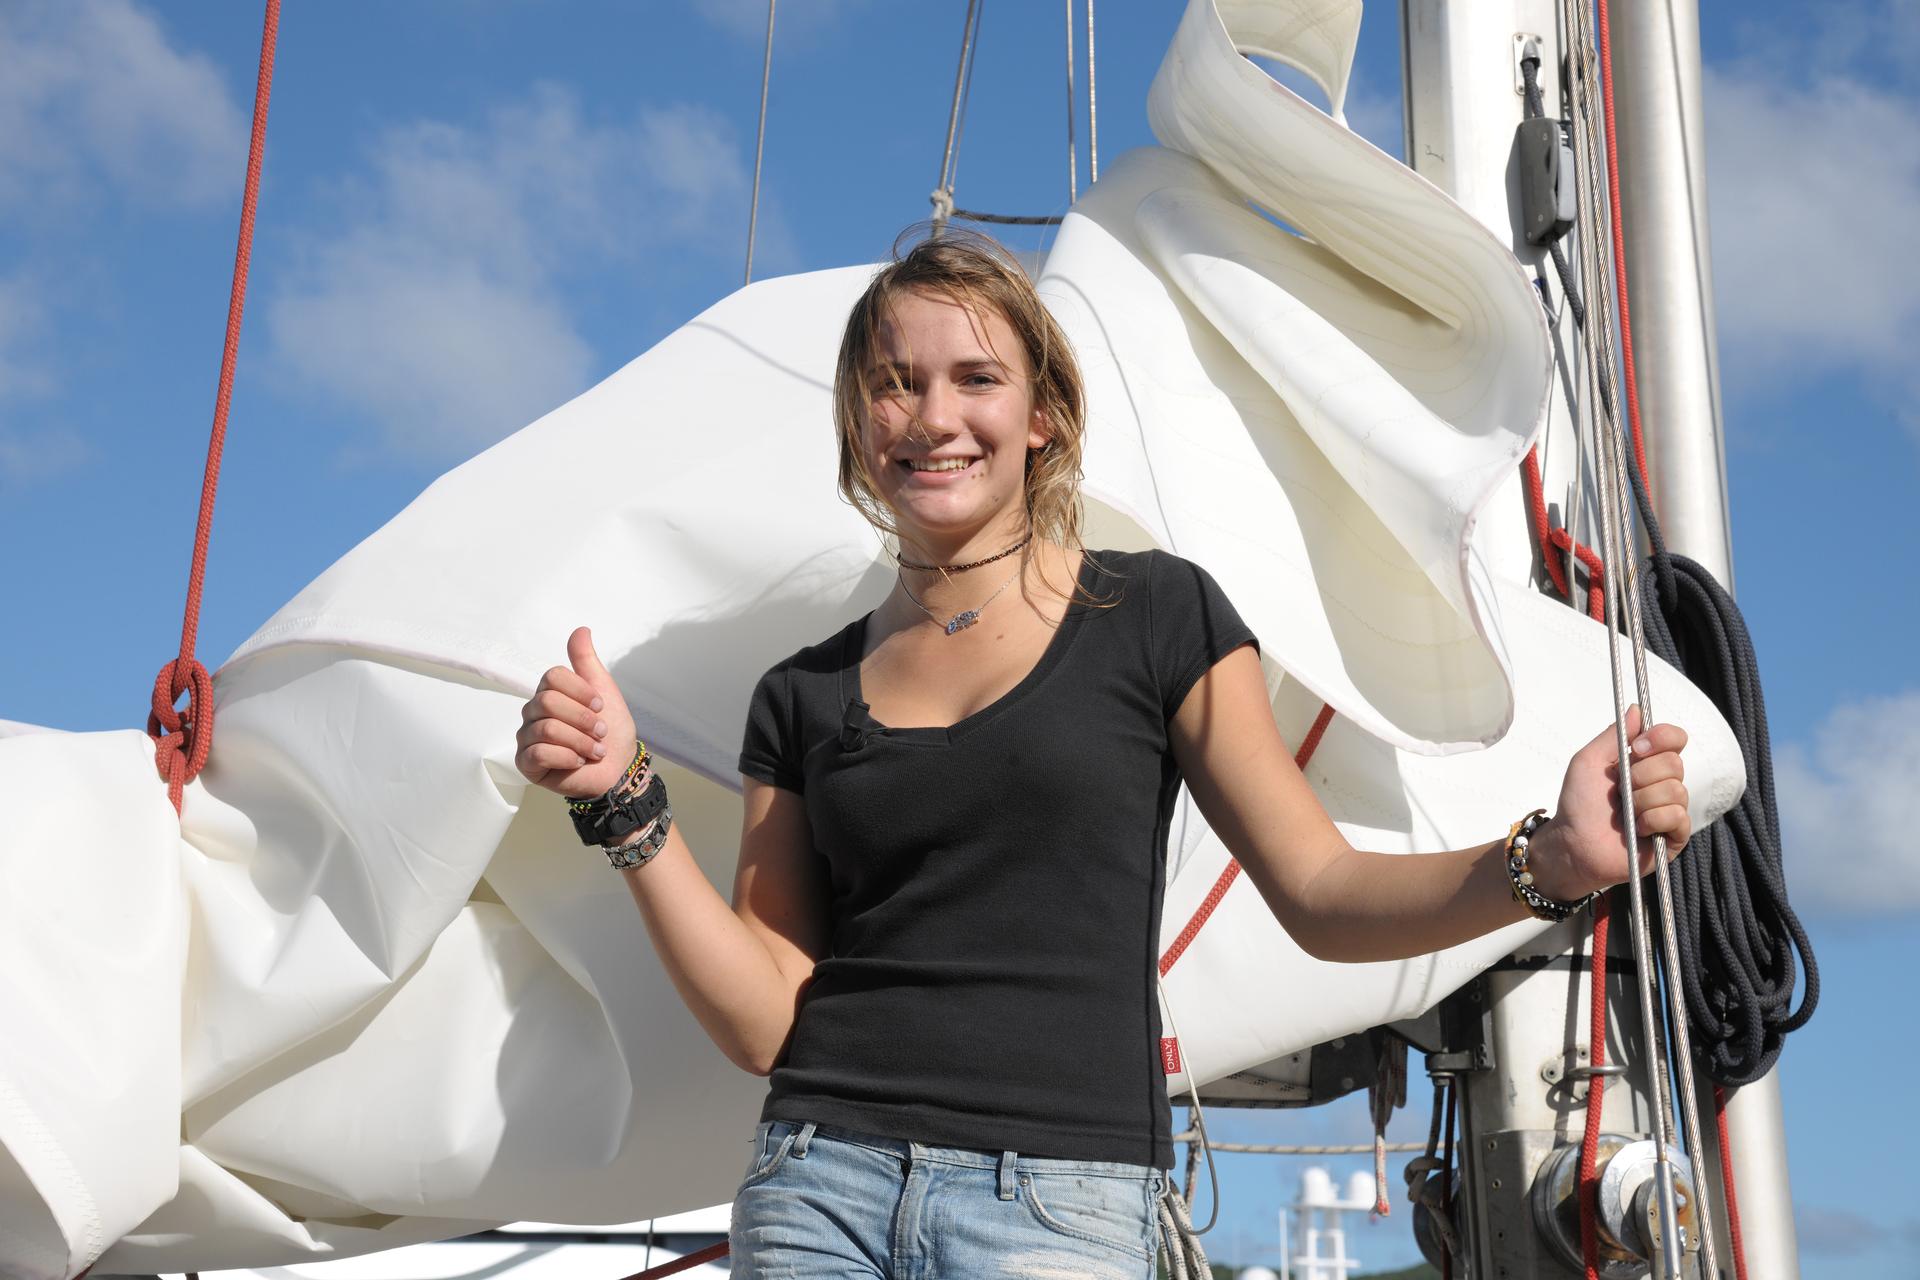 youngest person to circumnavigate the world in a sailboat solo